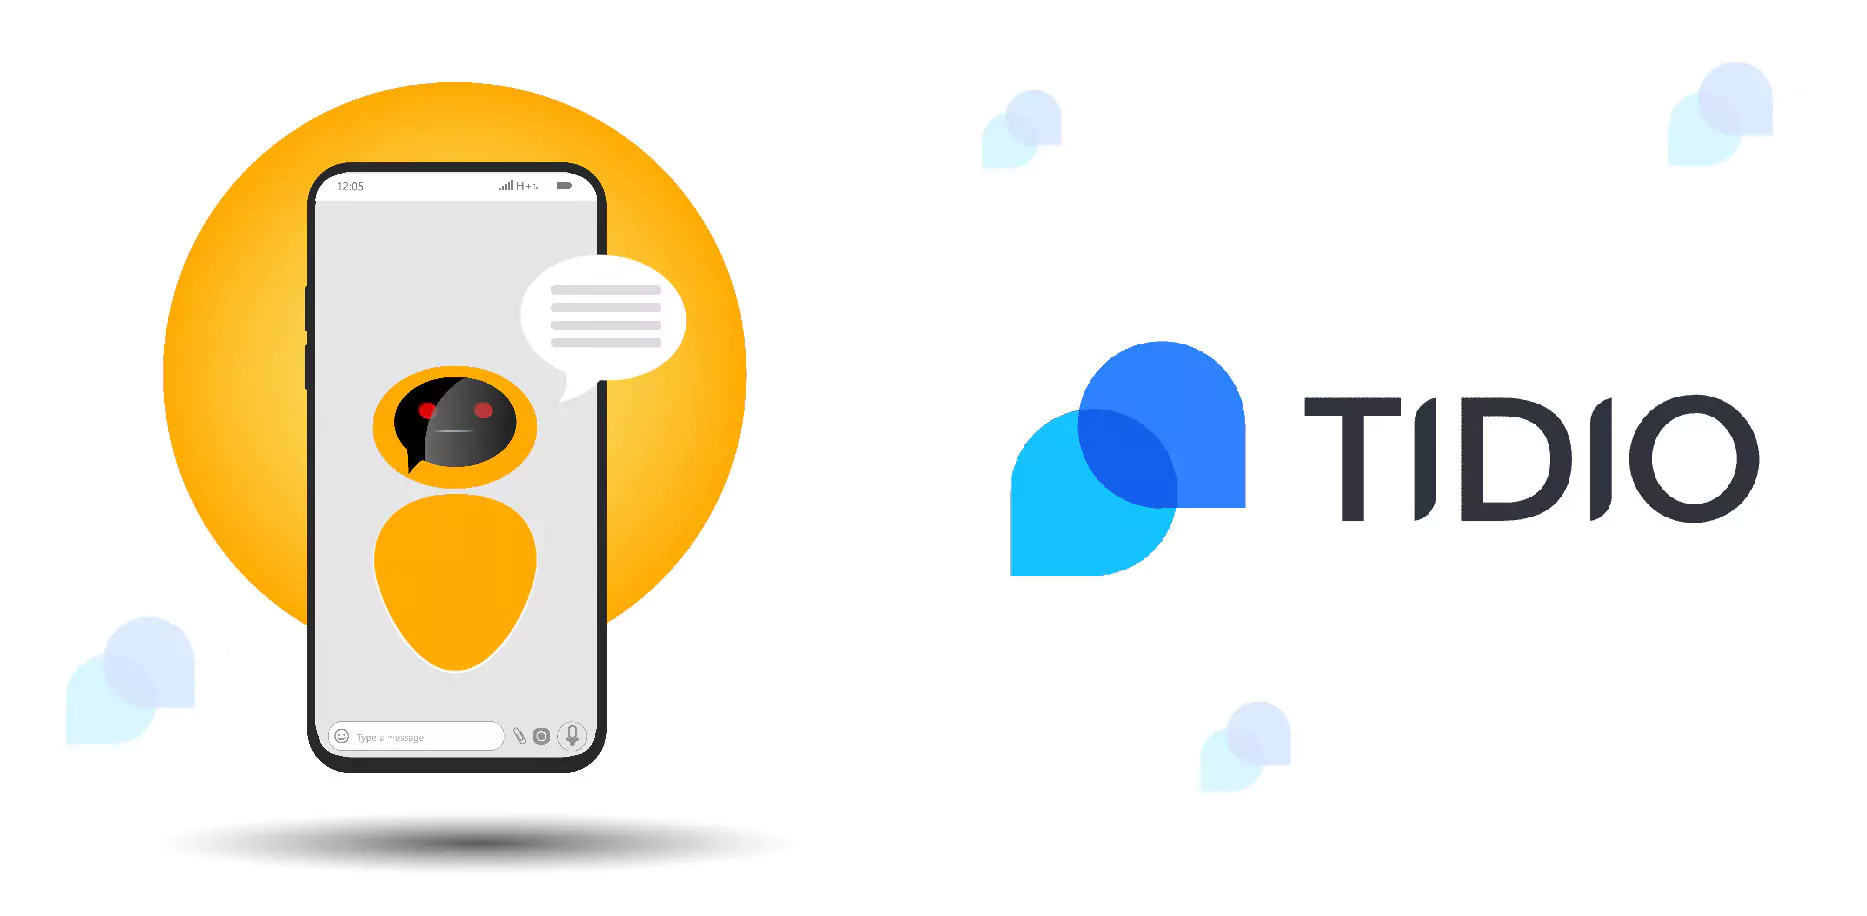 What is Tidio?